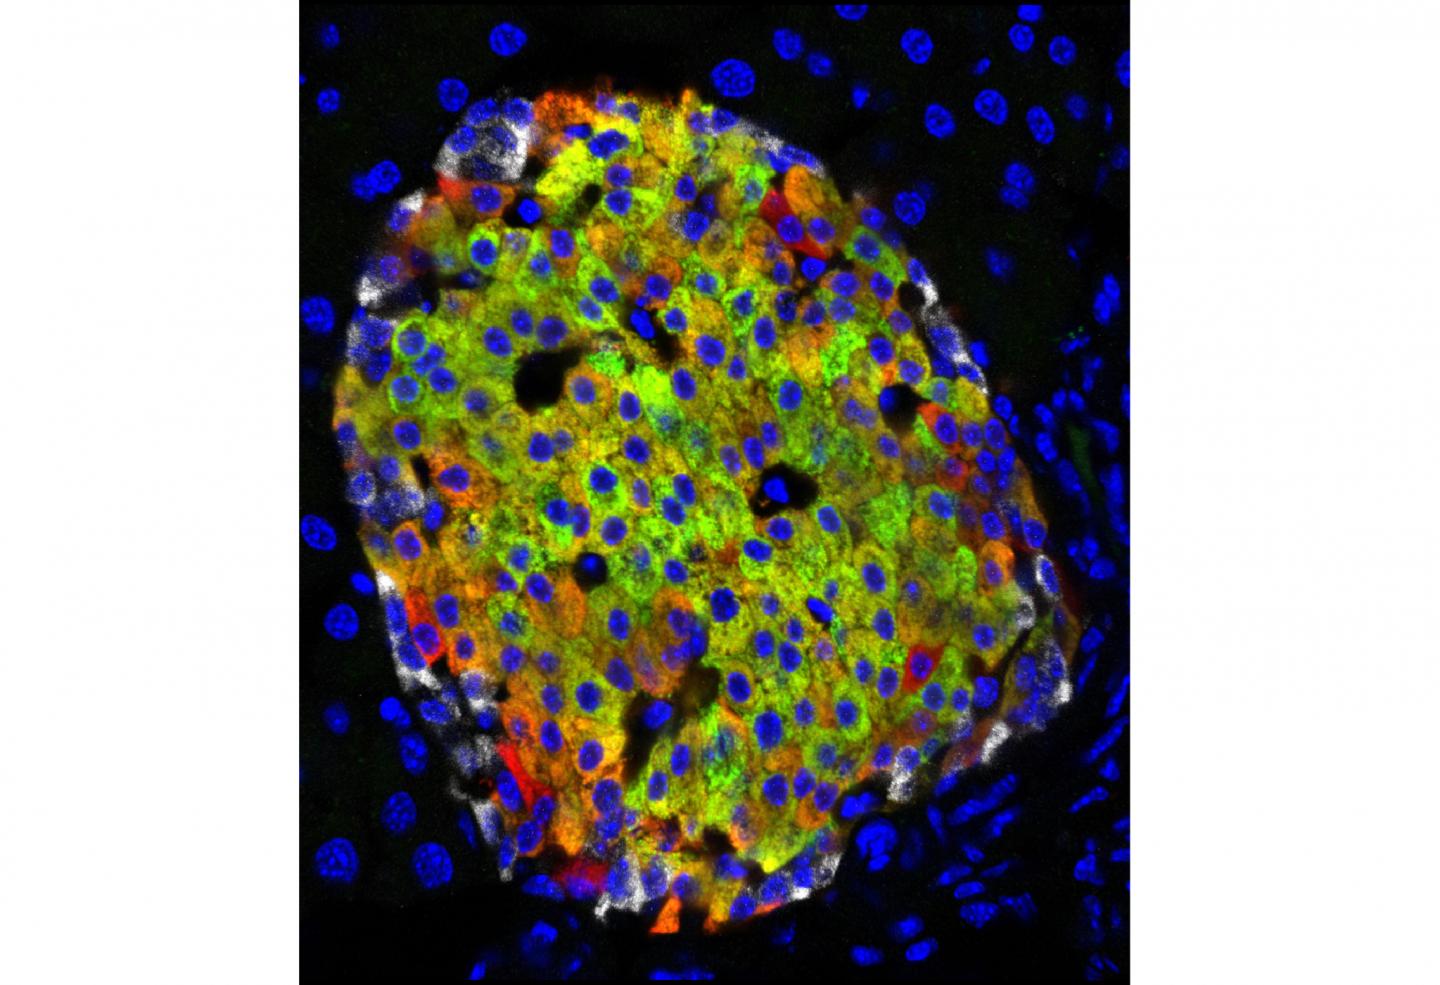 New Type of Insulin-Producing Cell Discovered